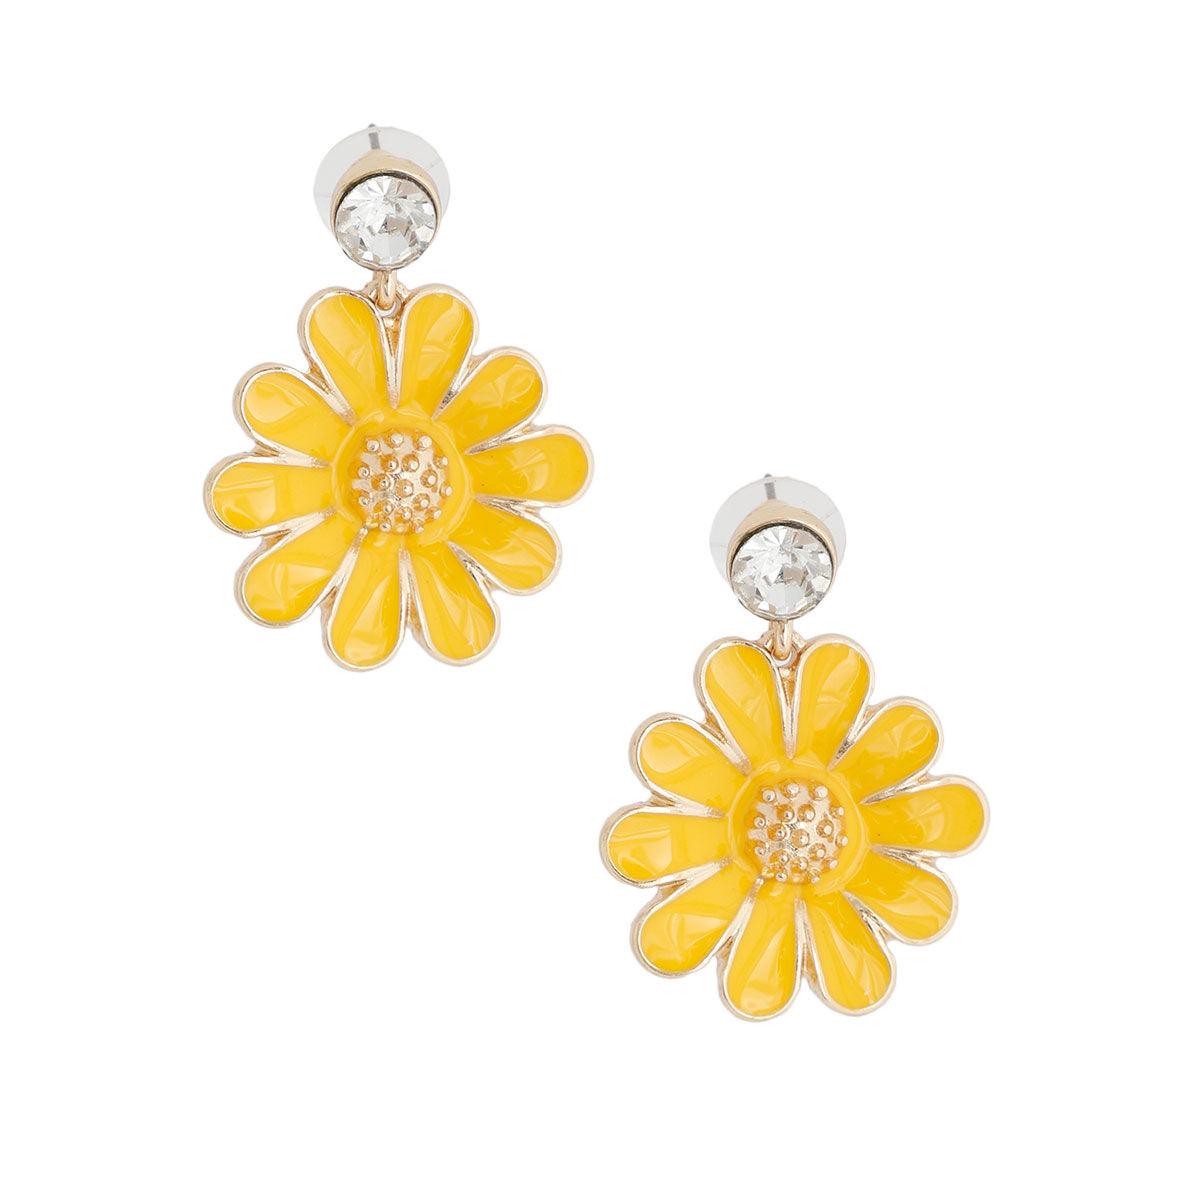 Get Groovy: Yellow Daisy Earrings for a Sweet Mod Style!